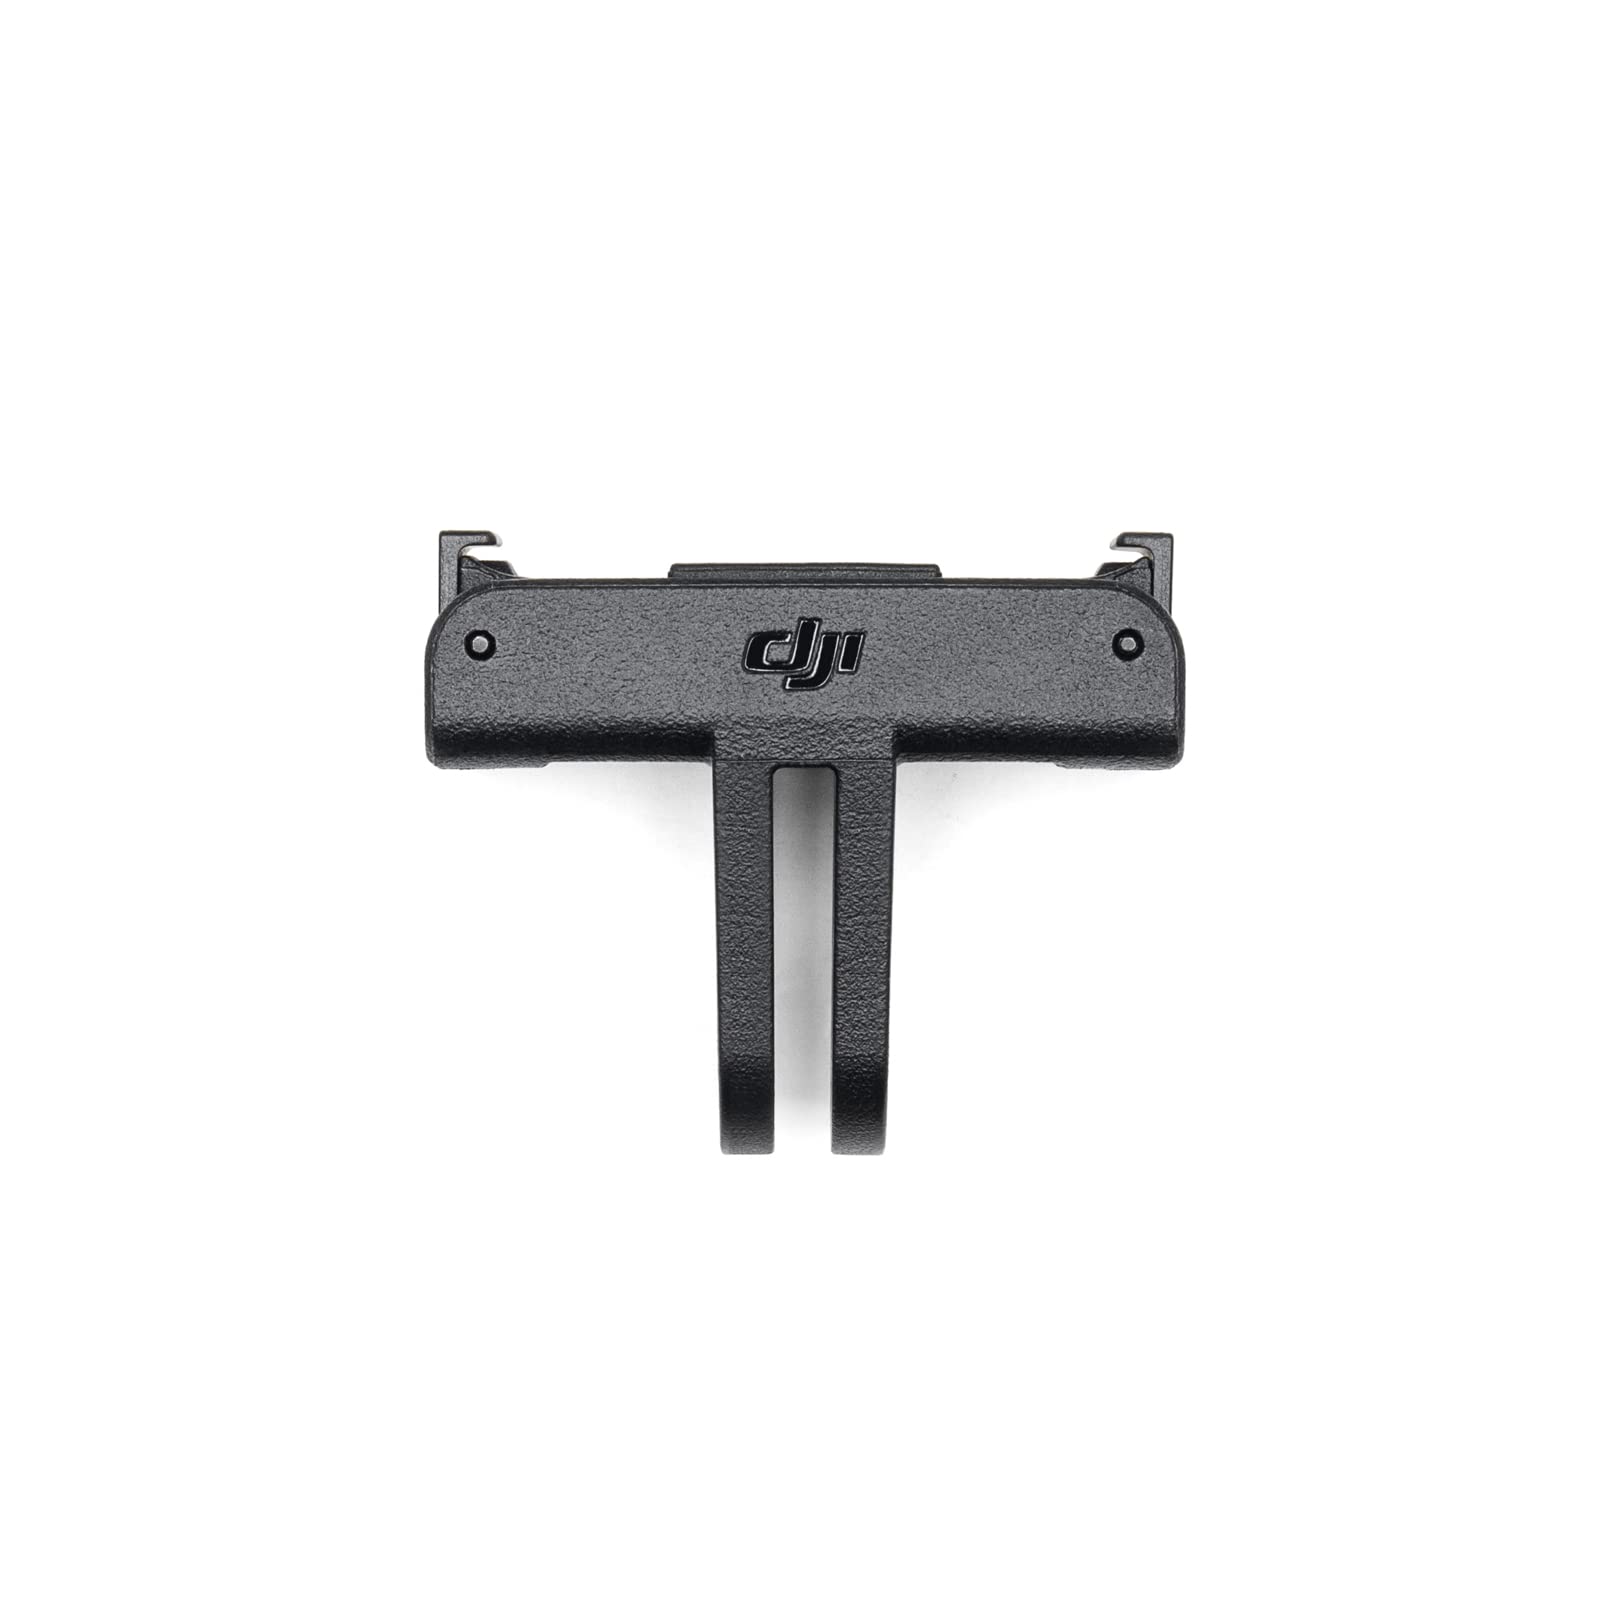 DJI Osmo Action Quick-Release Adapter Mount, Compatibility: Osmo Action 3, Osmo Action 4